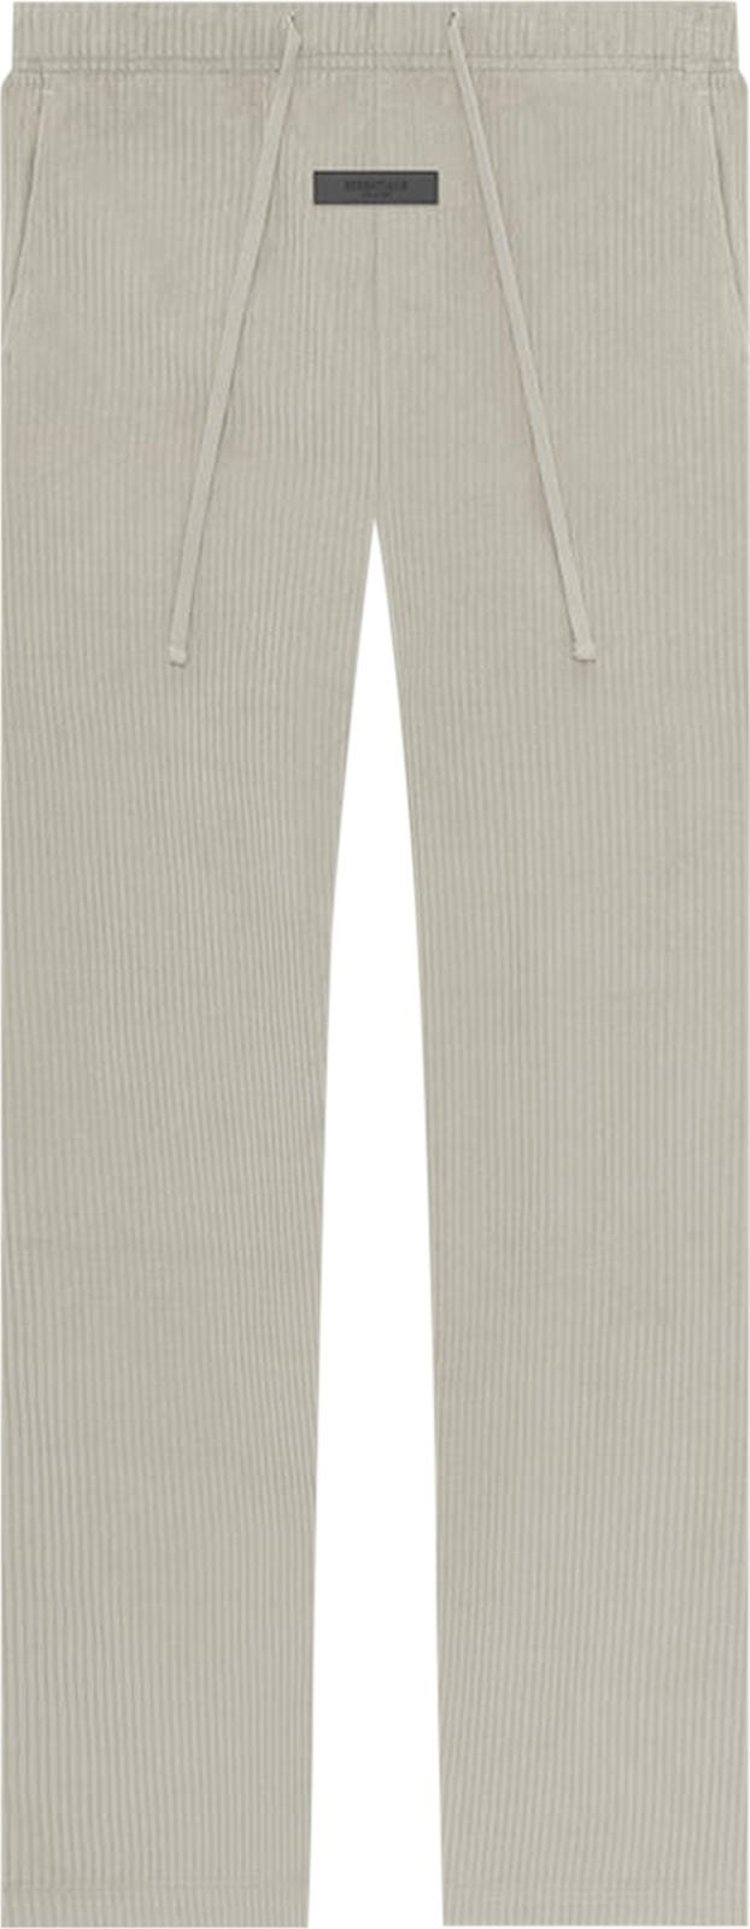 Buy Fear of God Essentials Relaxed Corduroy Pants 'Seal ...